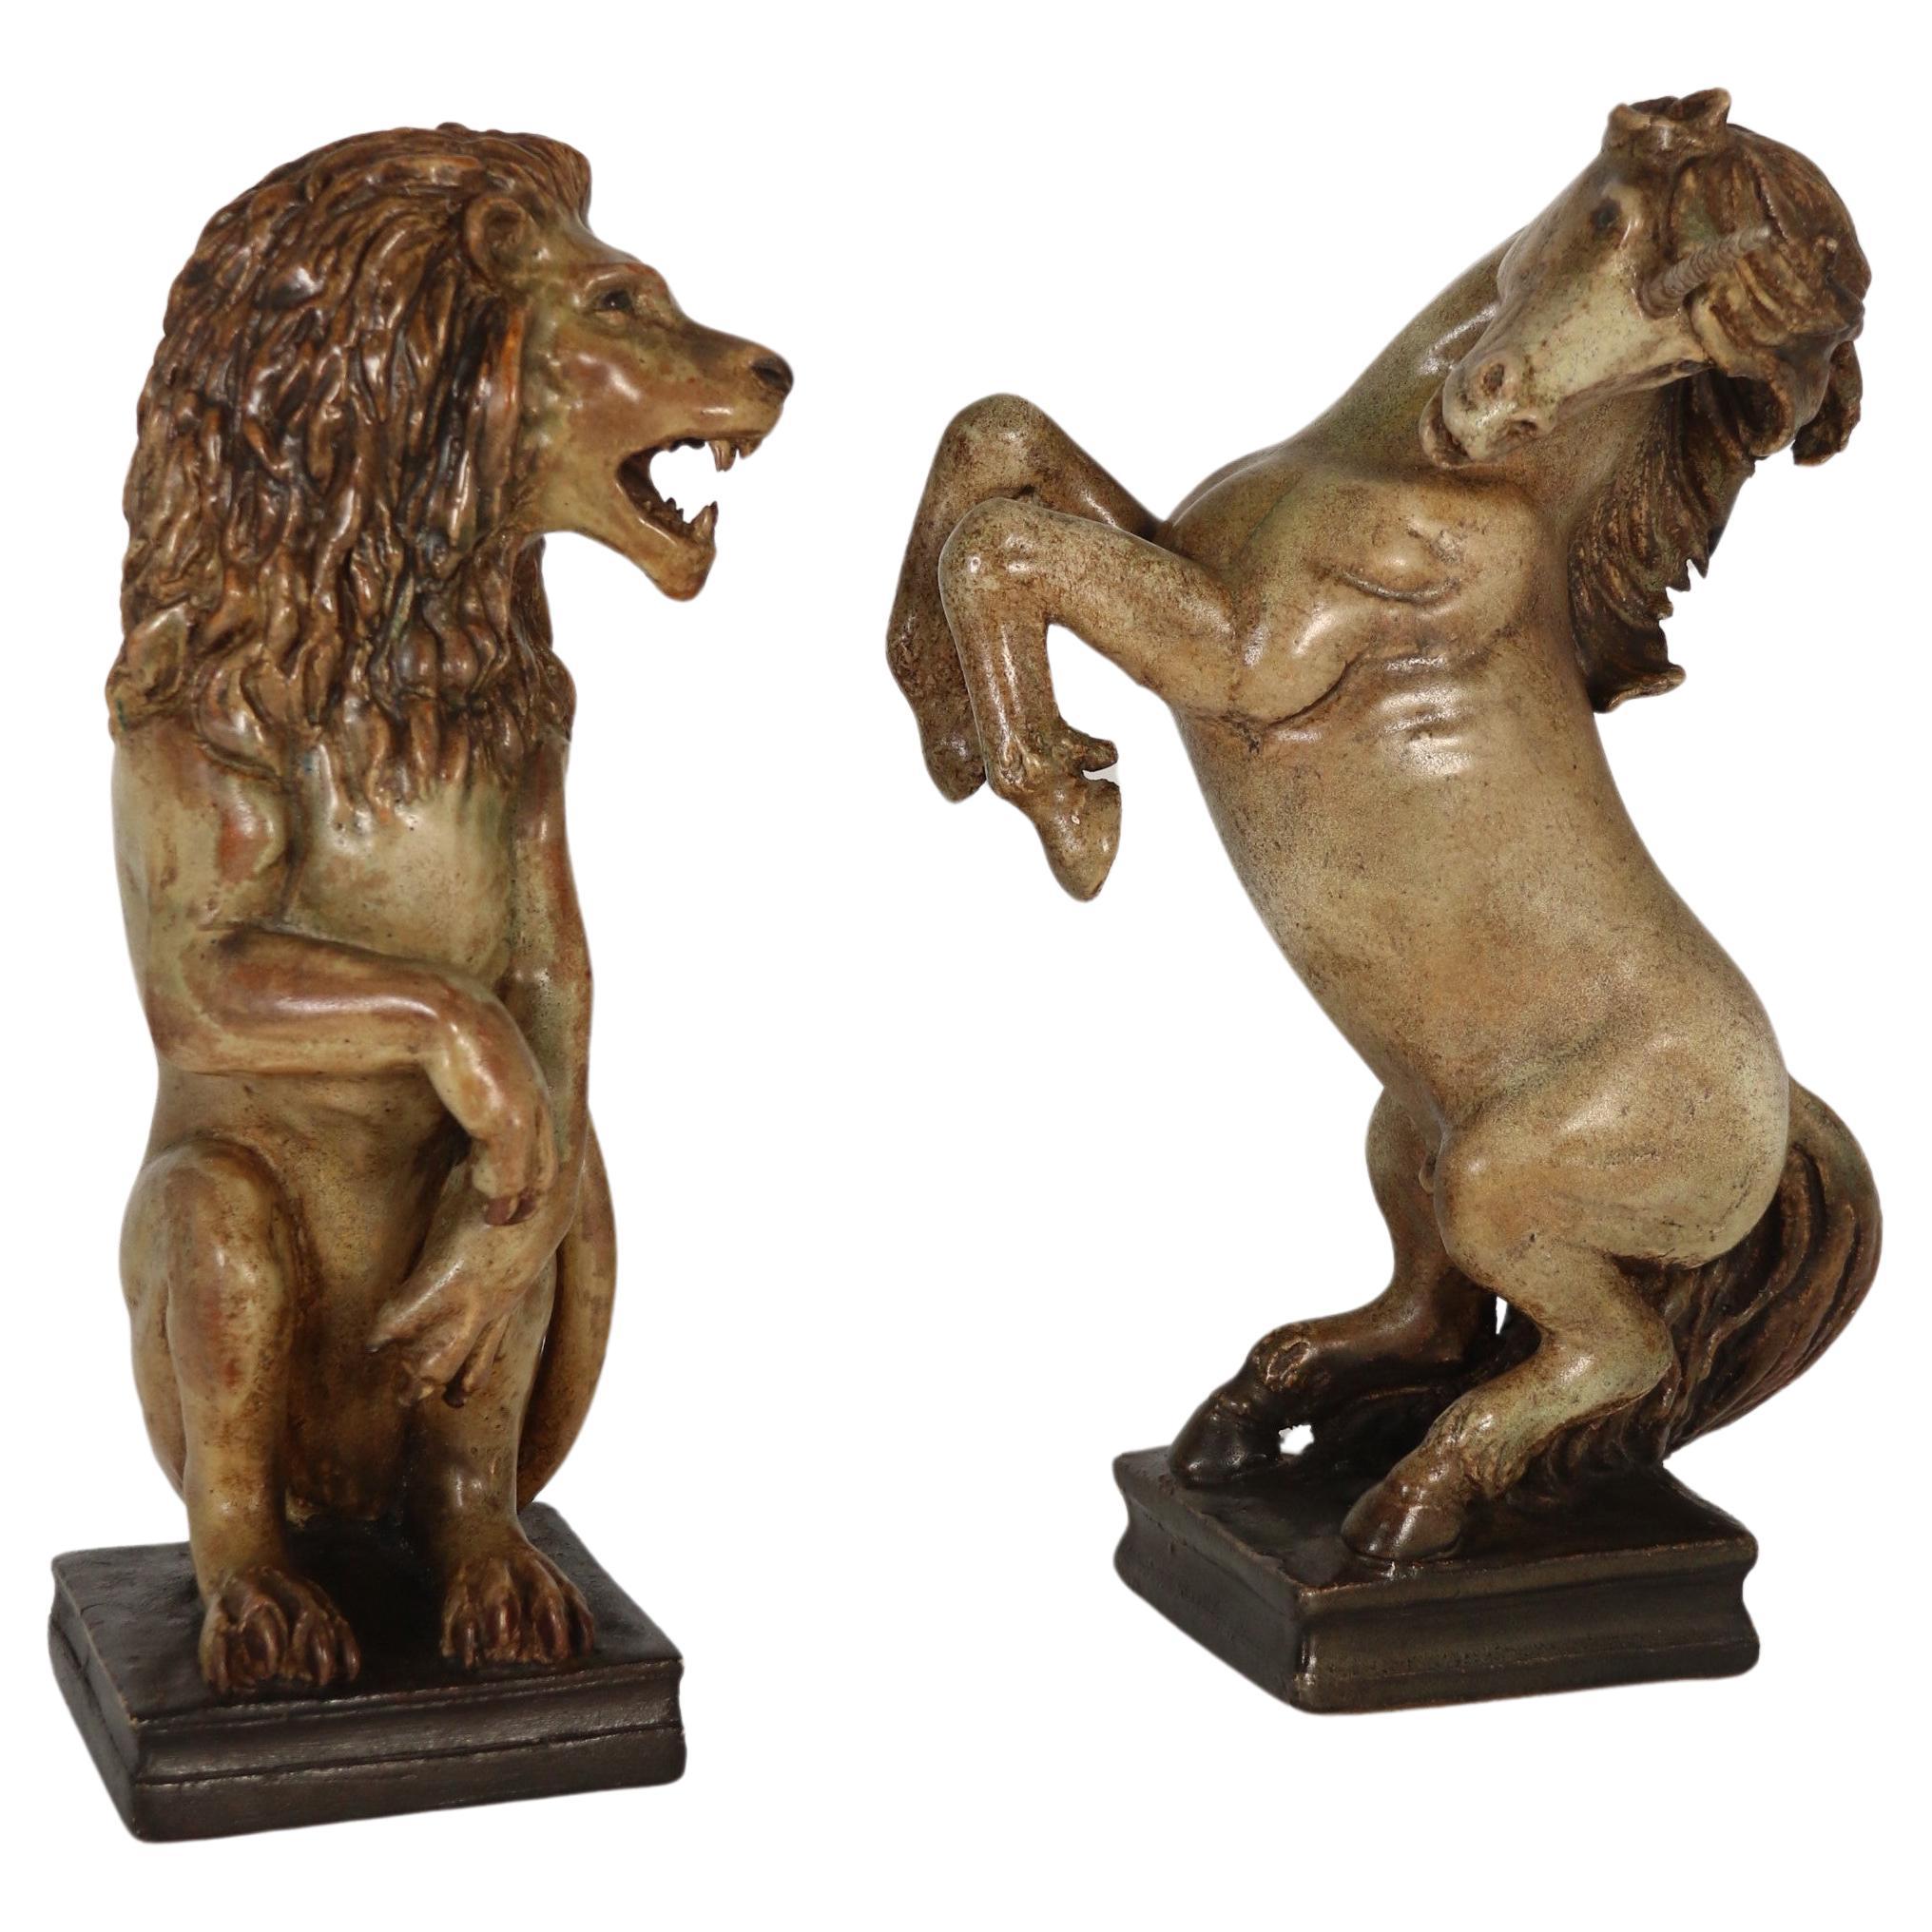 A pair of art pottery hand sculpted figures of a heraldic lion and unicorn. For Sale